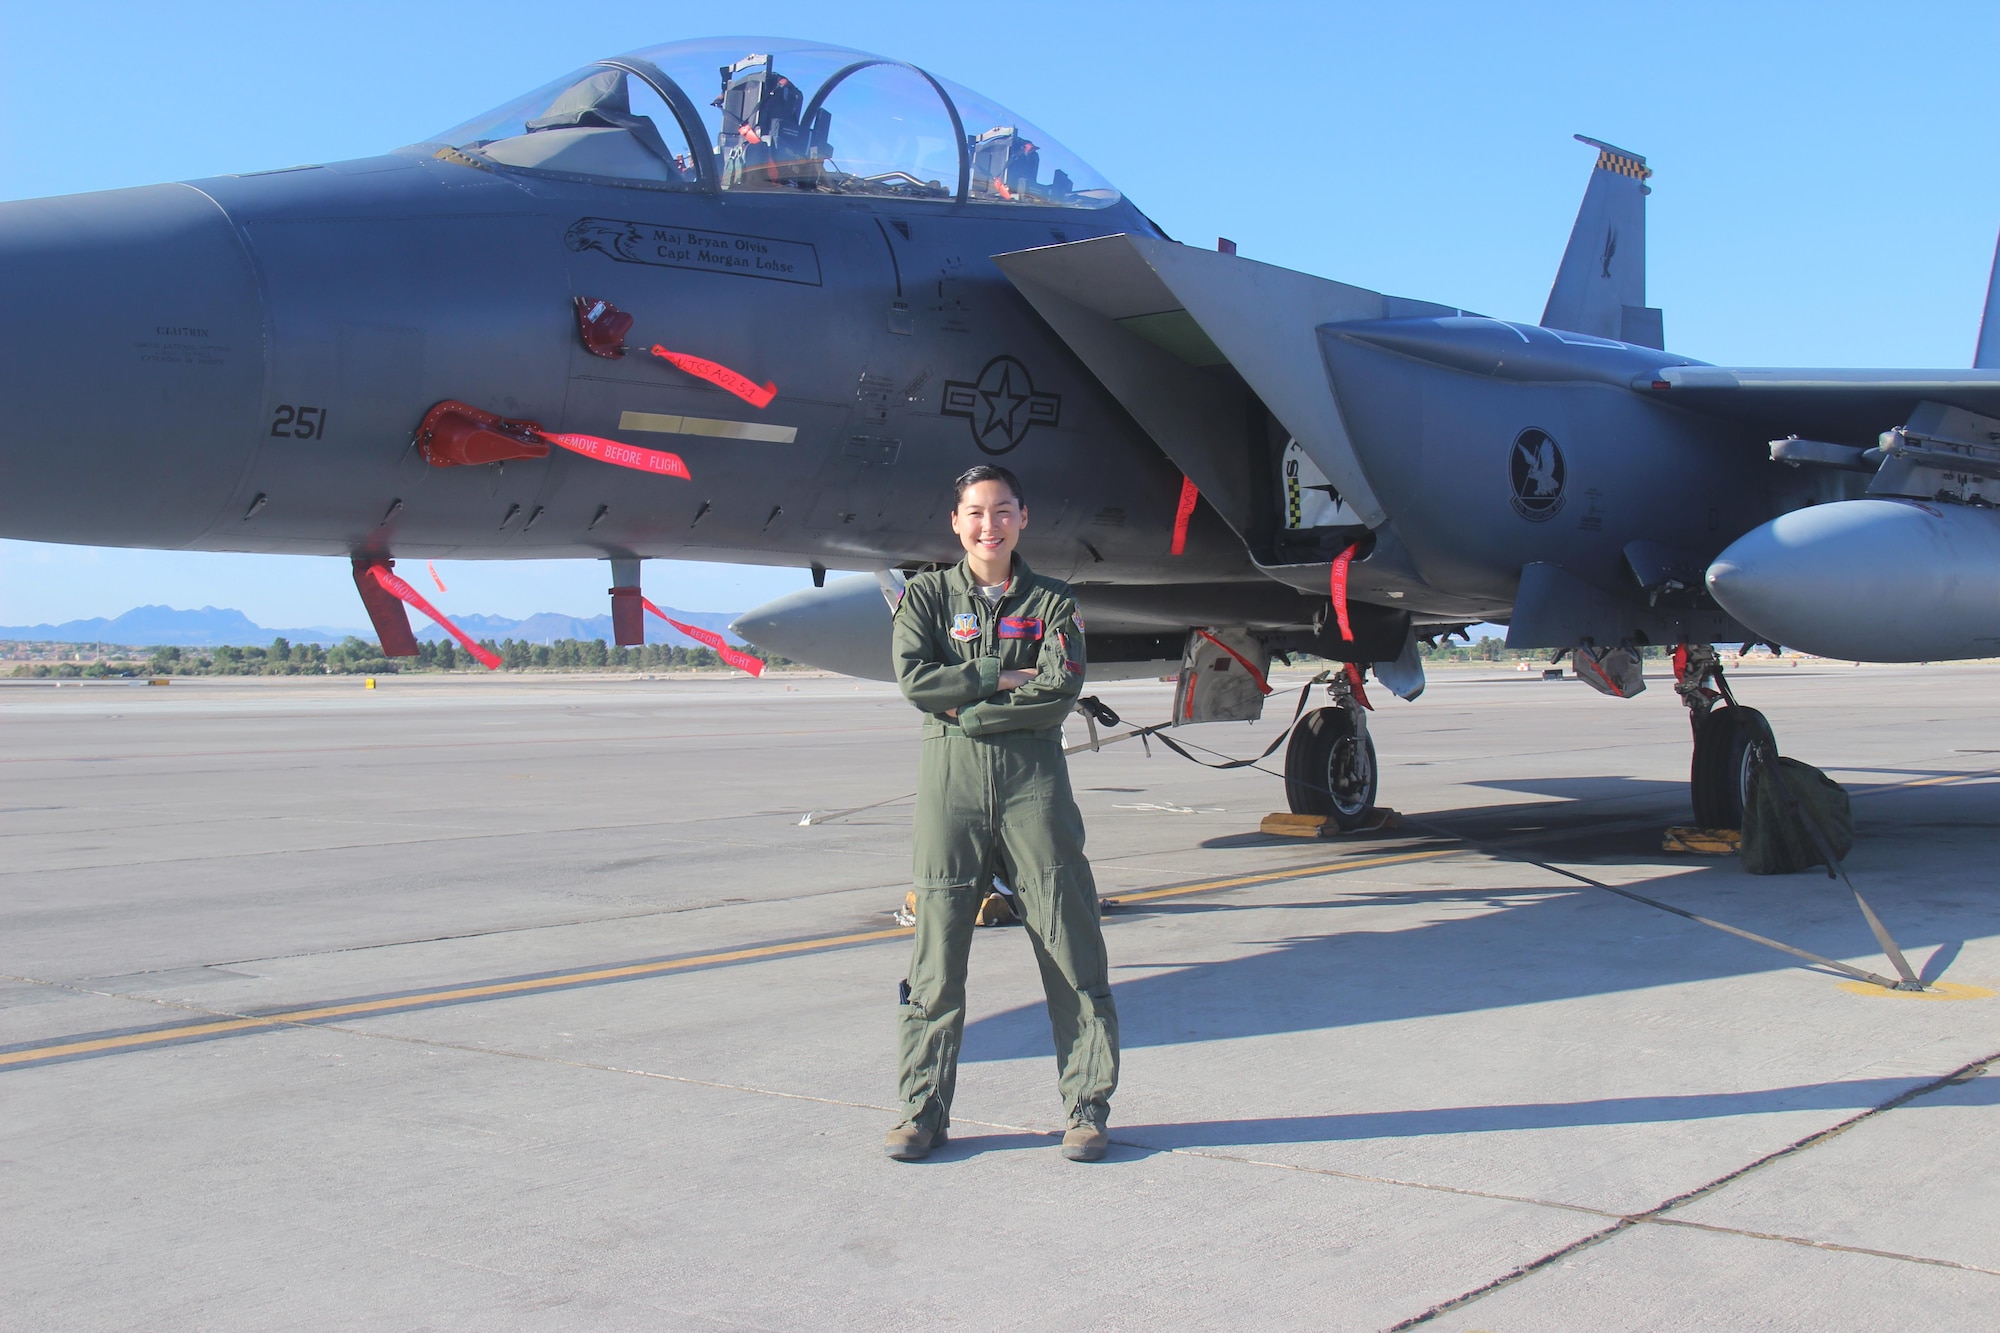 Capt. Kari Armstrong, an F-15E Strike Eagle weapon systems officer with the 389th Fighter Squadron, received more than a diploma from the U.S. Air Force Weapons School at Nellis Air Force Base, Nevada, June 27, 2015. Armstrong also became the first female F-15E weapons school officer and the second female student in a fighter platform -- after Col. Jeannie Leavitt in June 1998 -- to complete the graduate-level school. (Courtesy photo/Susan Garcia)